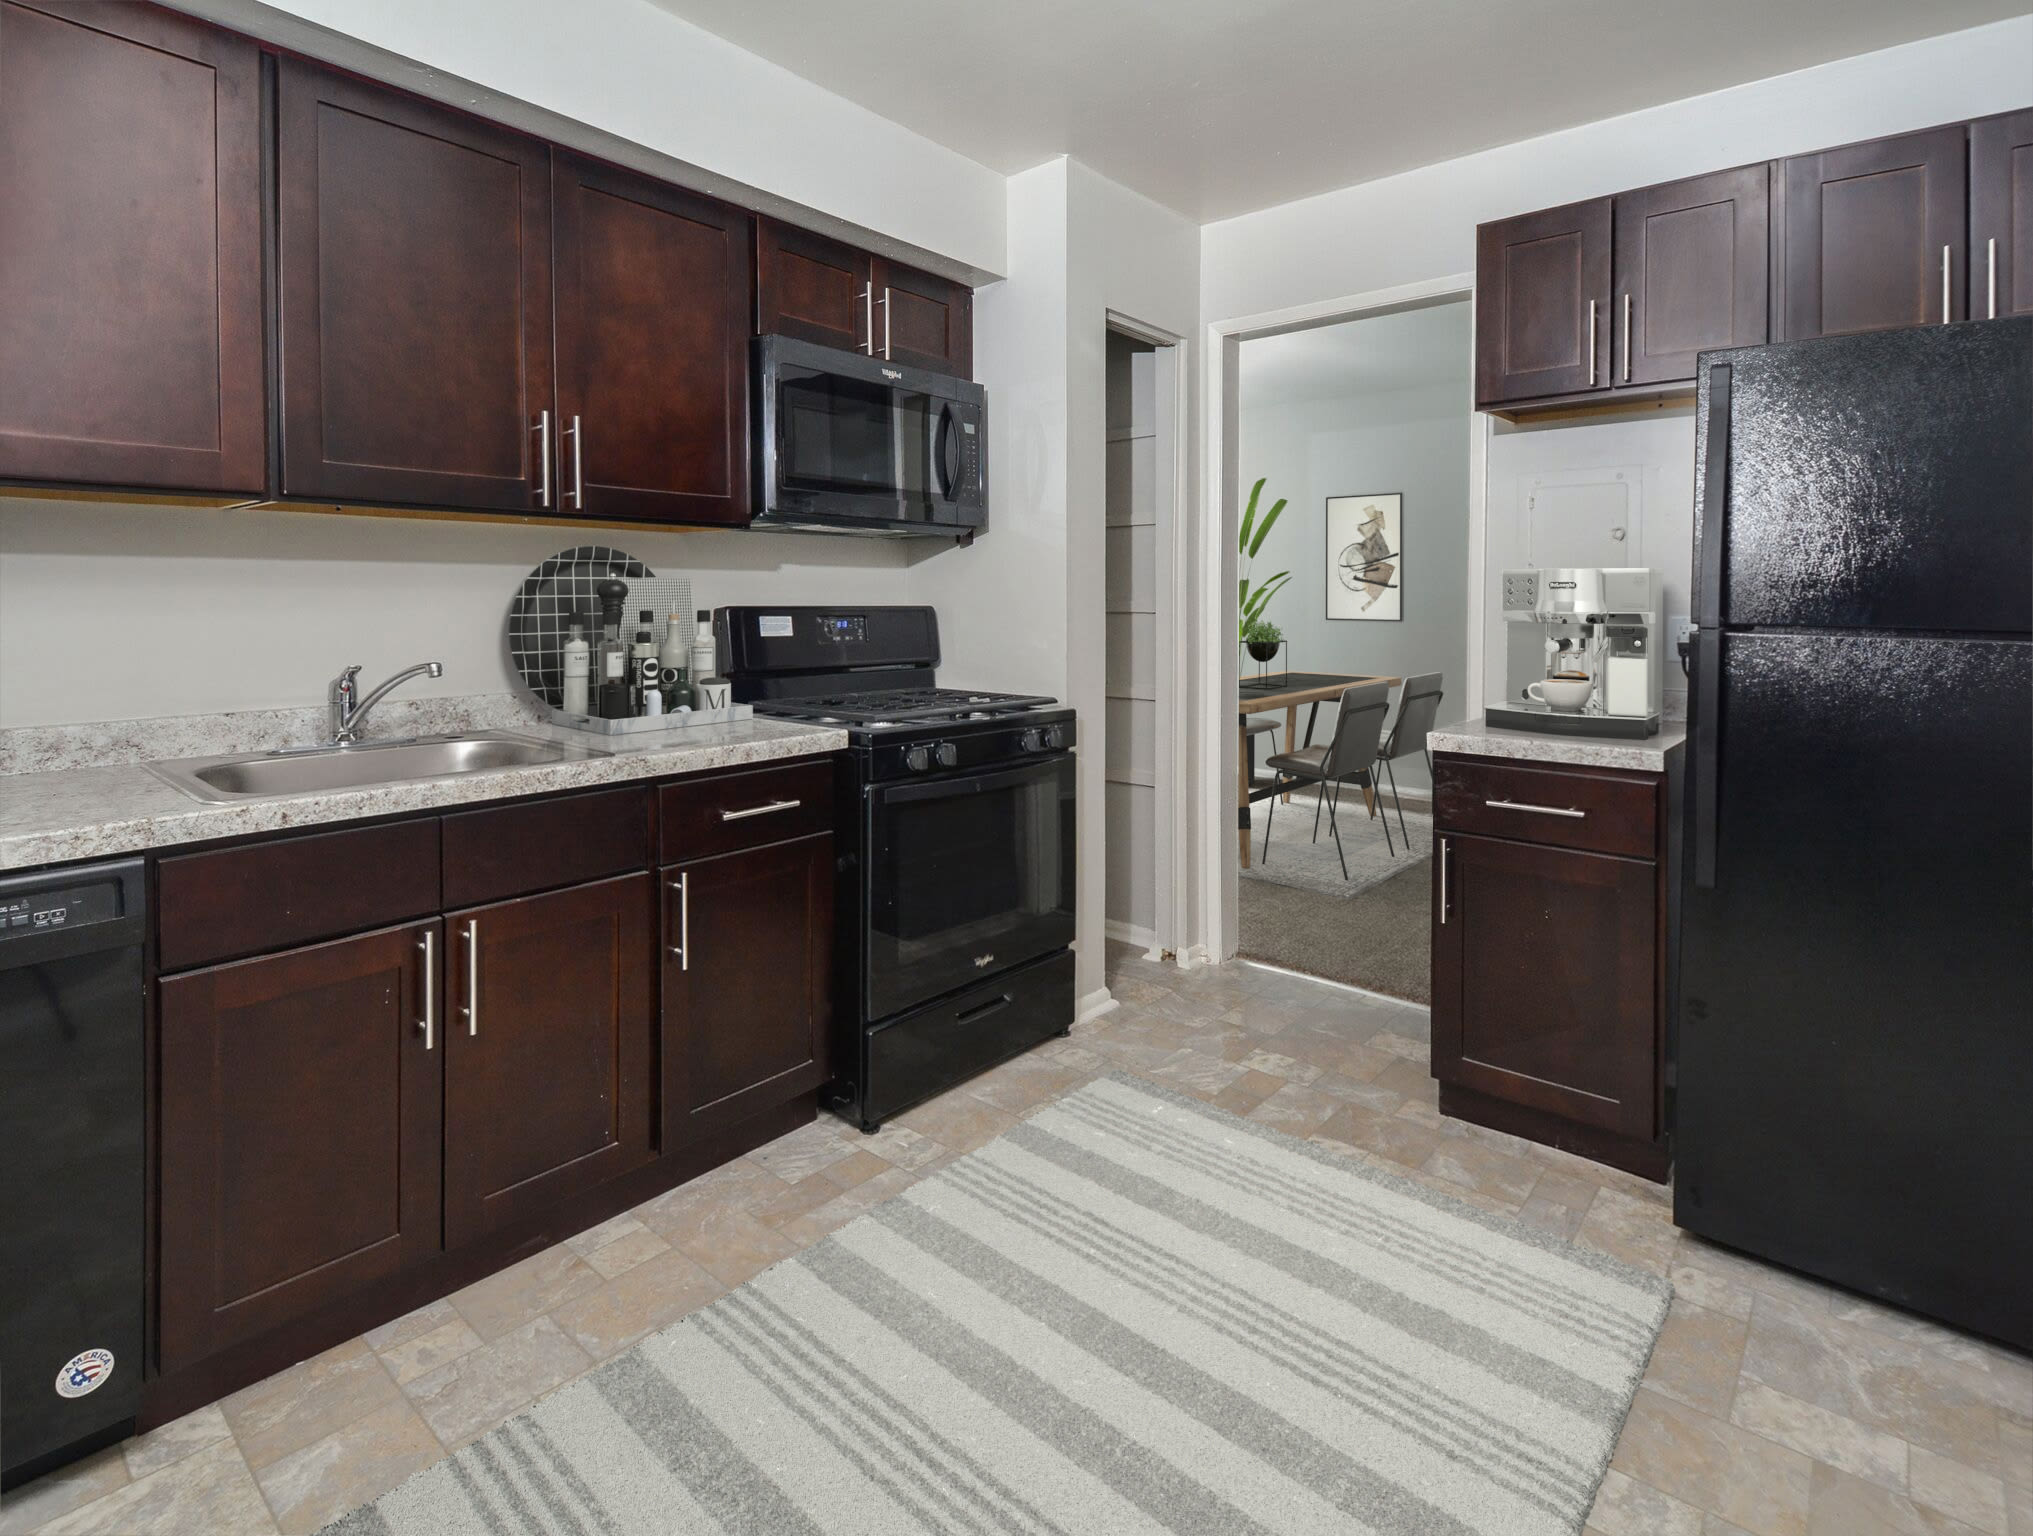 Model kitchen with wood cabinets at Metro Pointe, Baltimore, Maryland